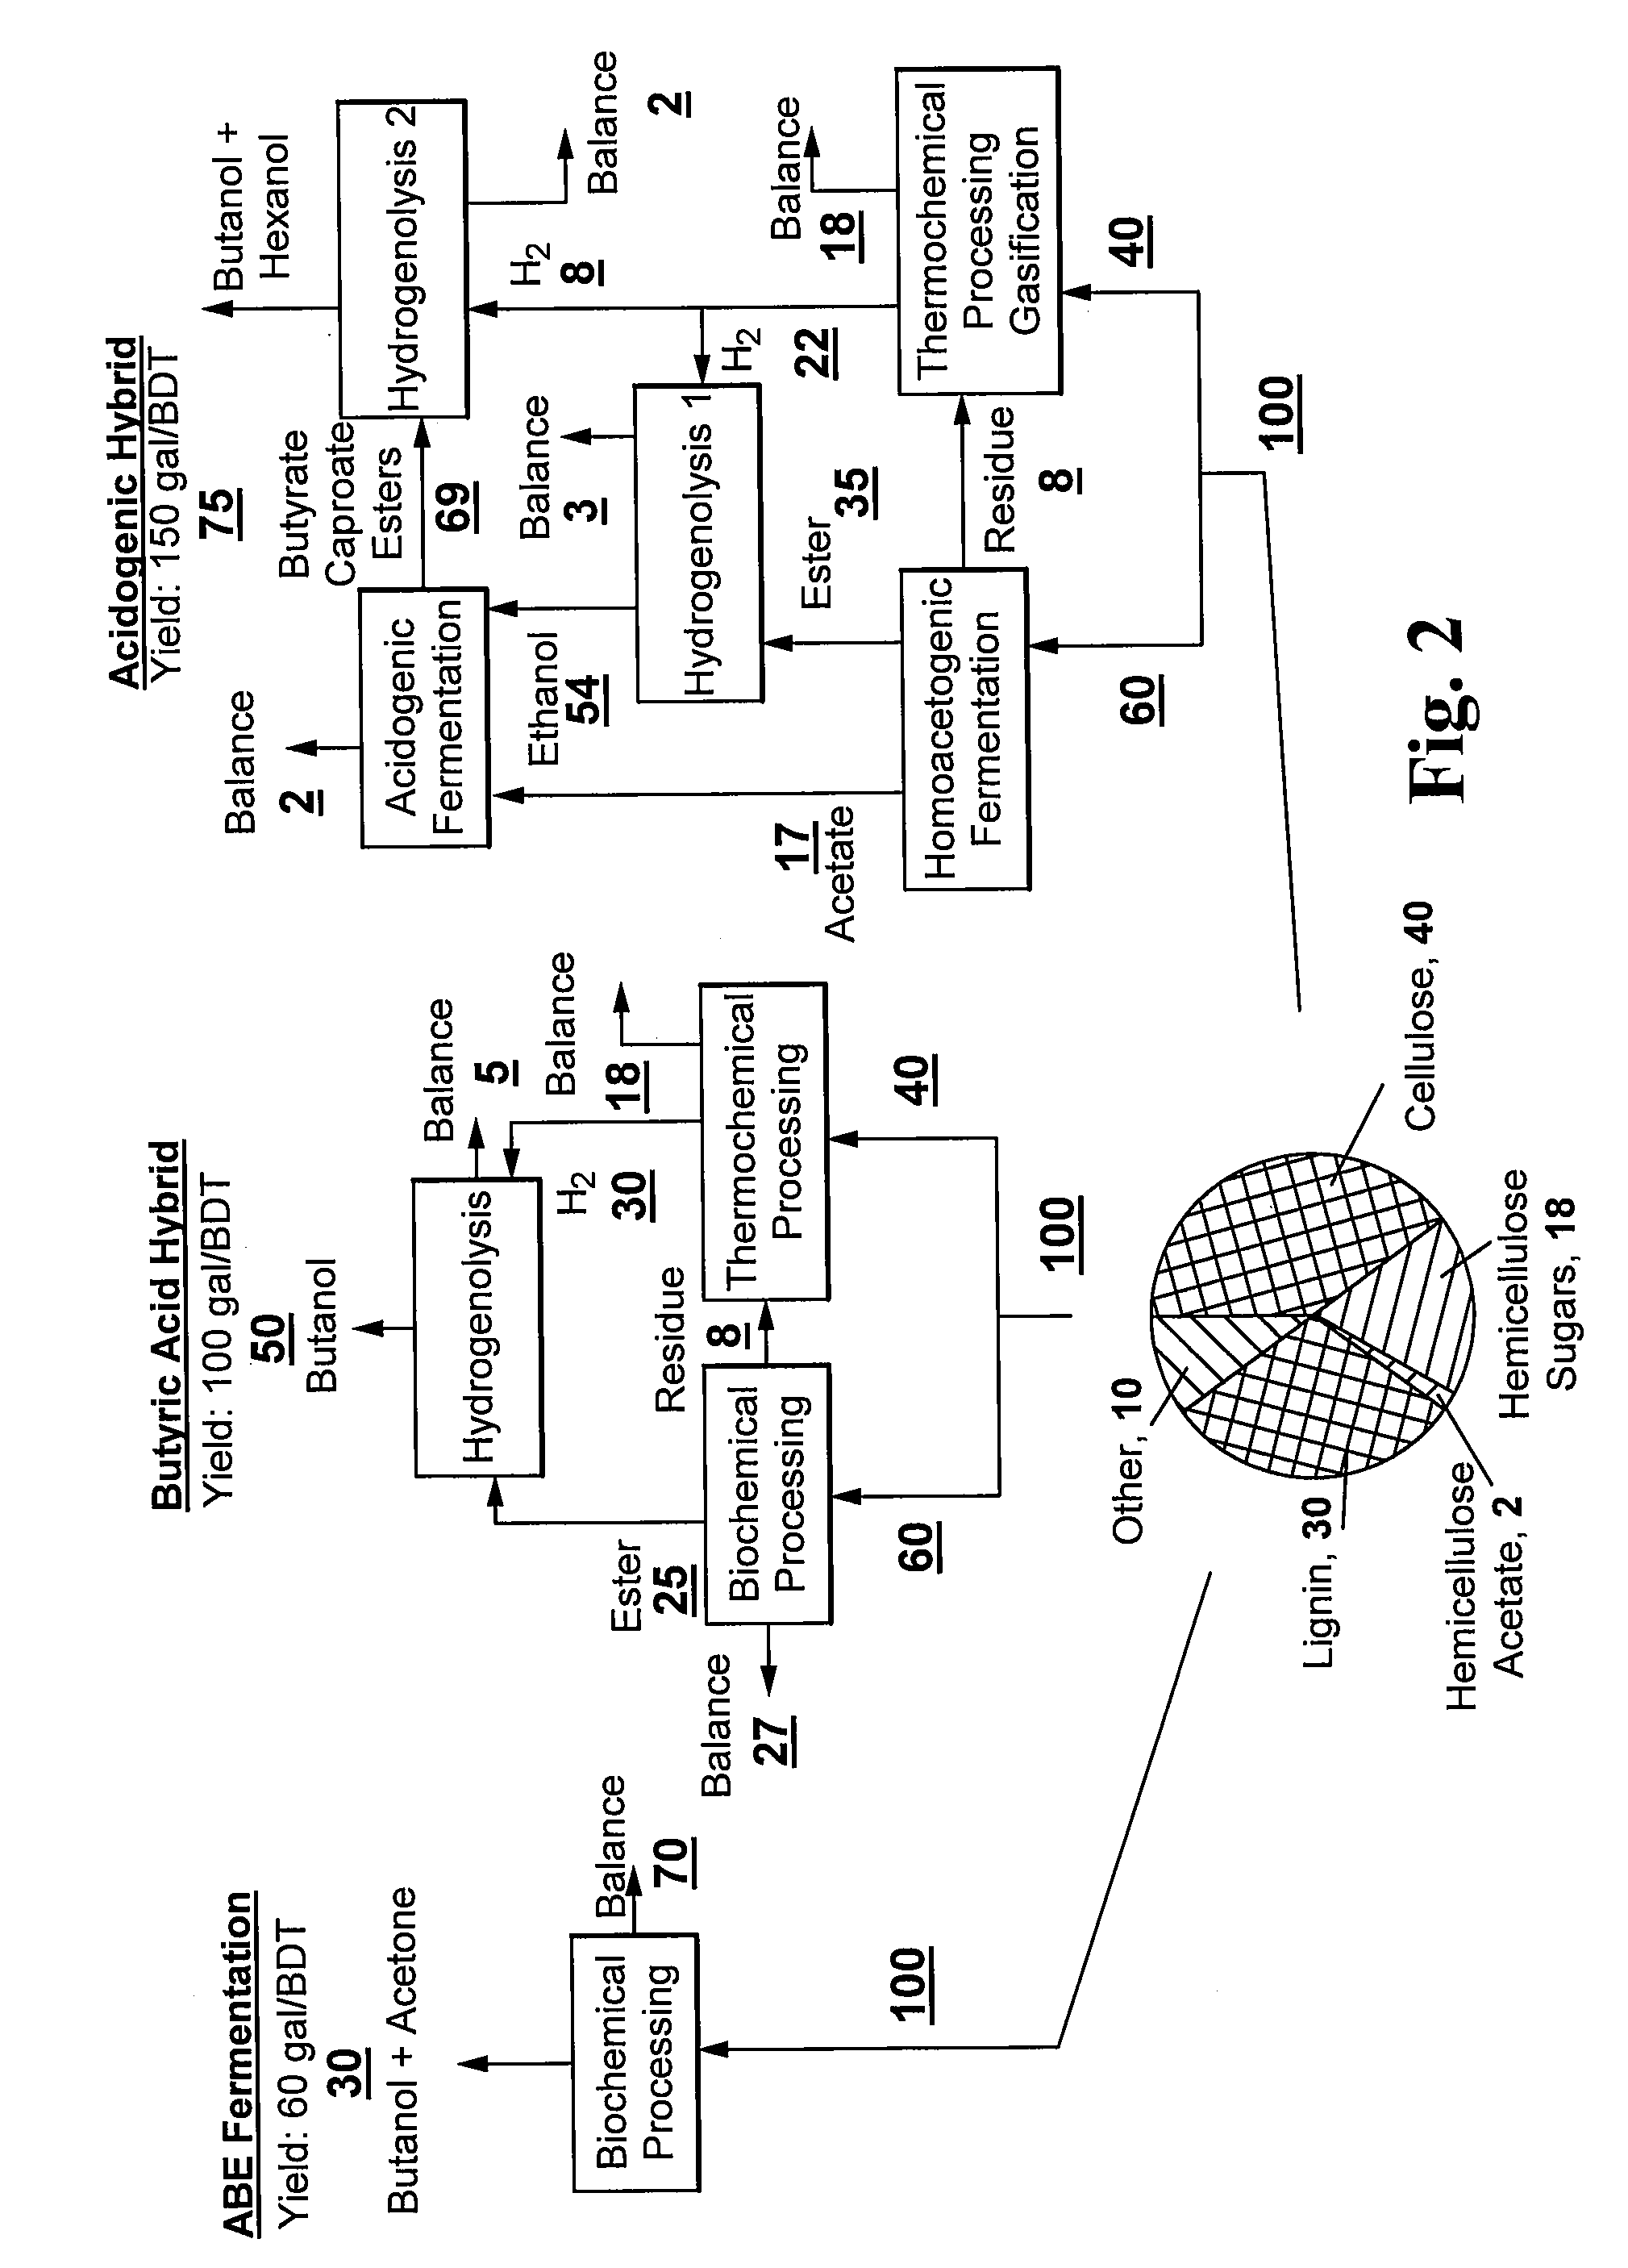 Indirect production of butanol and hexanol